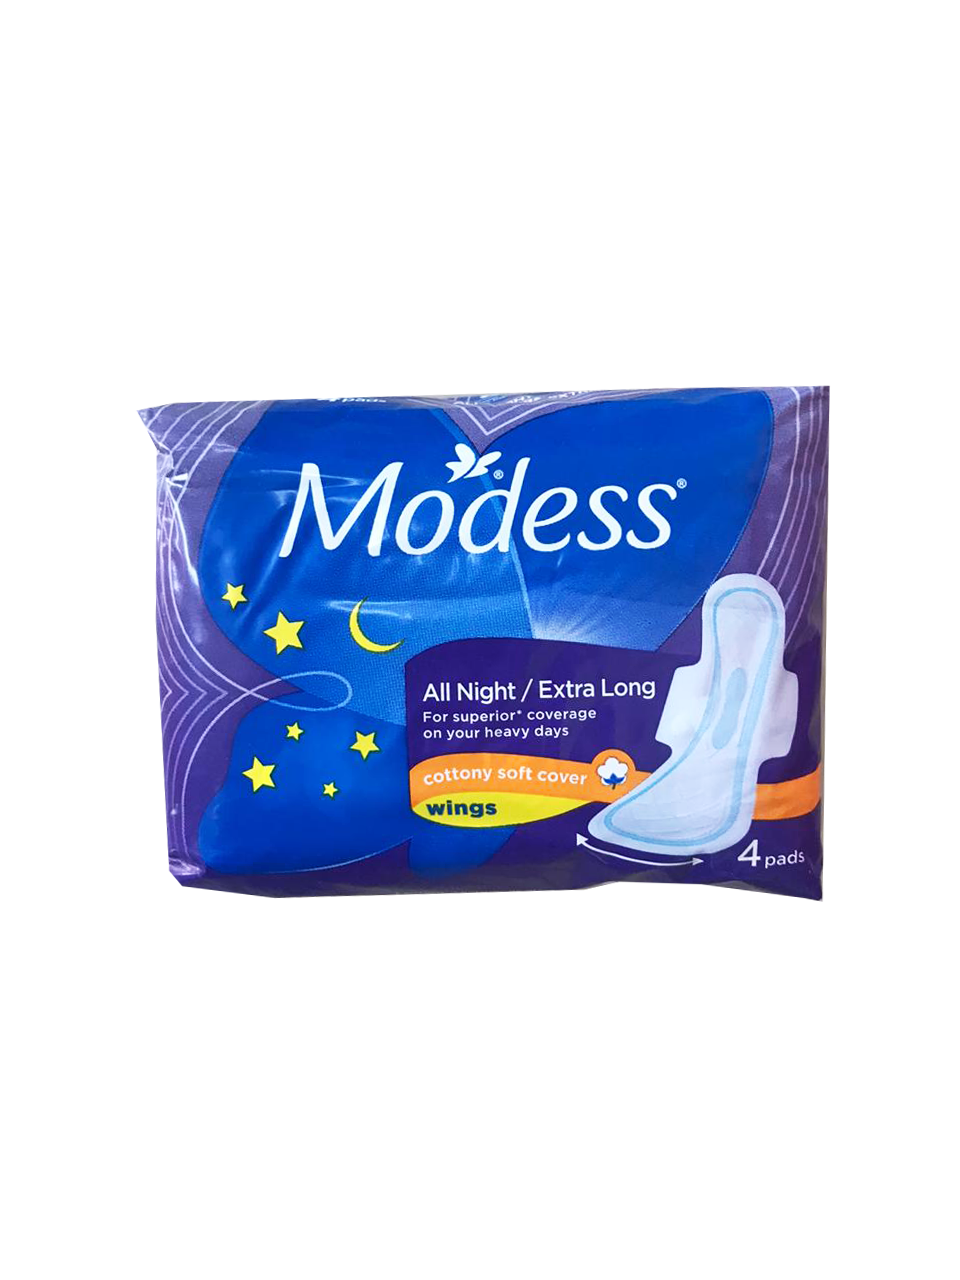 Modess All Night Extra Long Wings 4 pads